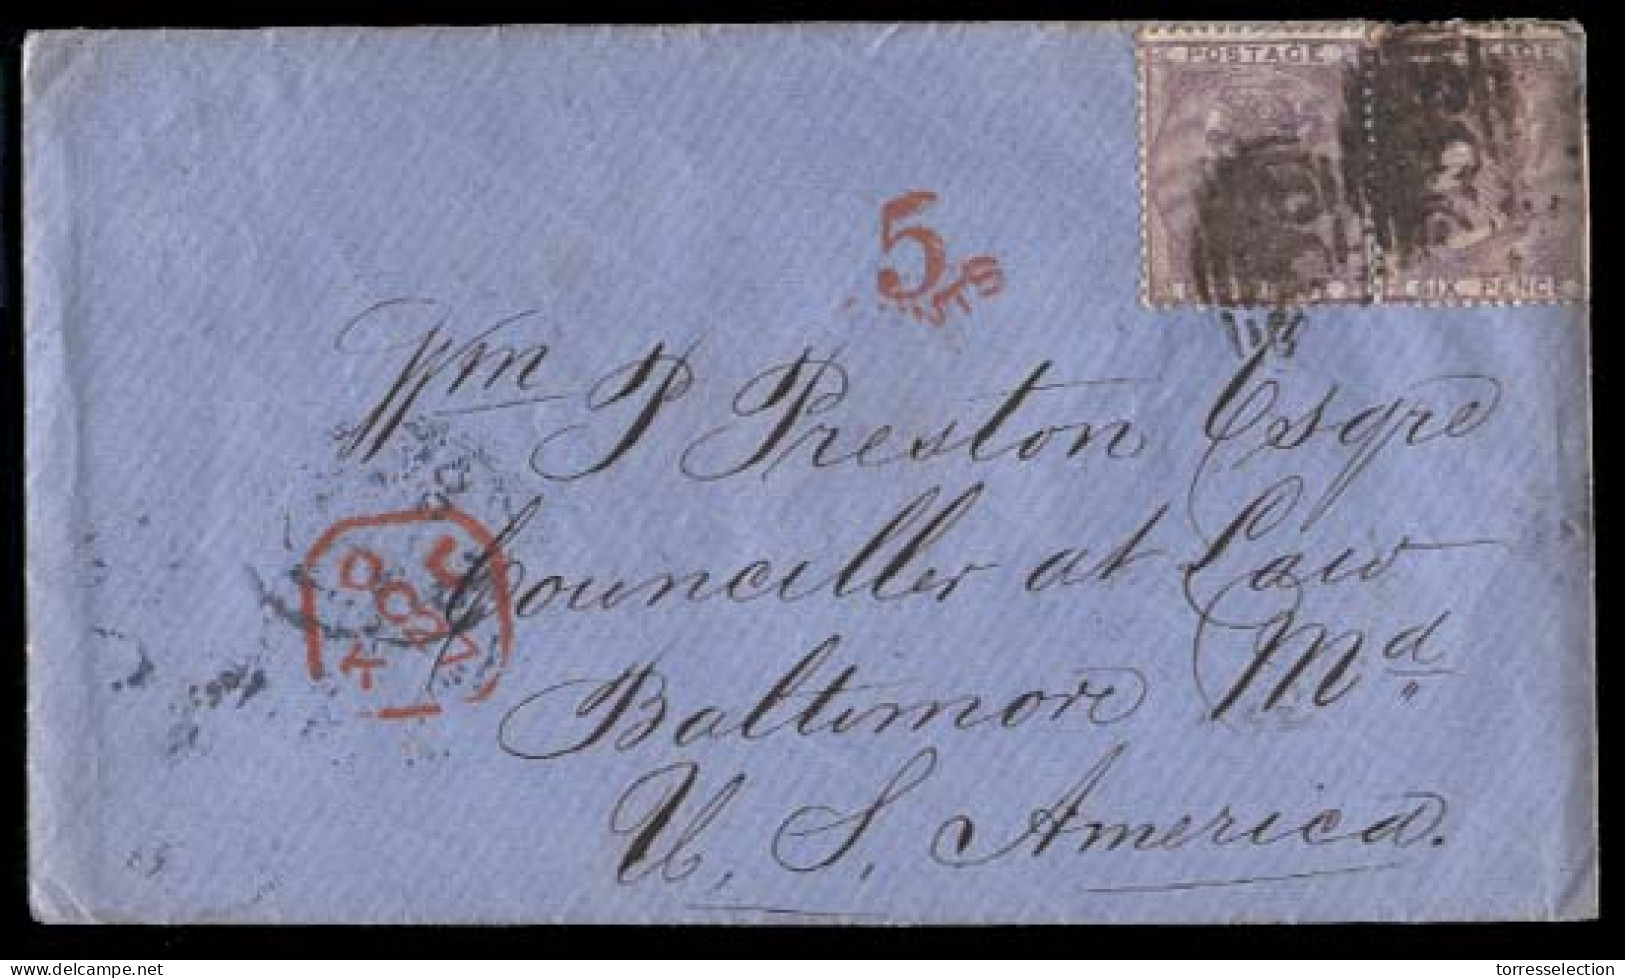 GREAT BRITAIN. 1859 (Oct 26) Dewsbury, Via Bailey And Manchester To Baltimore, MD, USA. Envelope Franked QV 6d Lilac Hor - ...-1840 Voorlopers